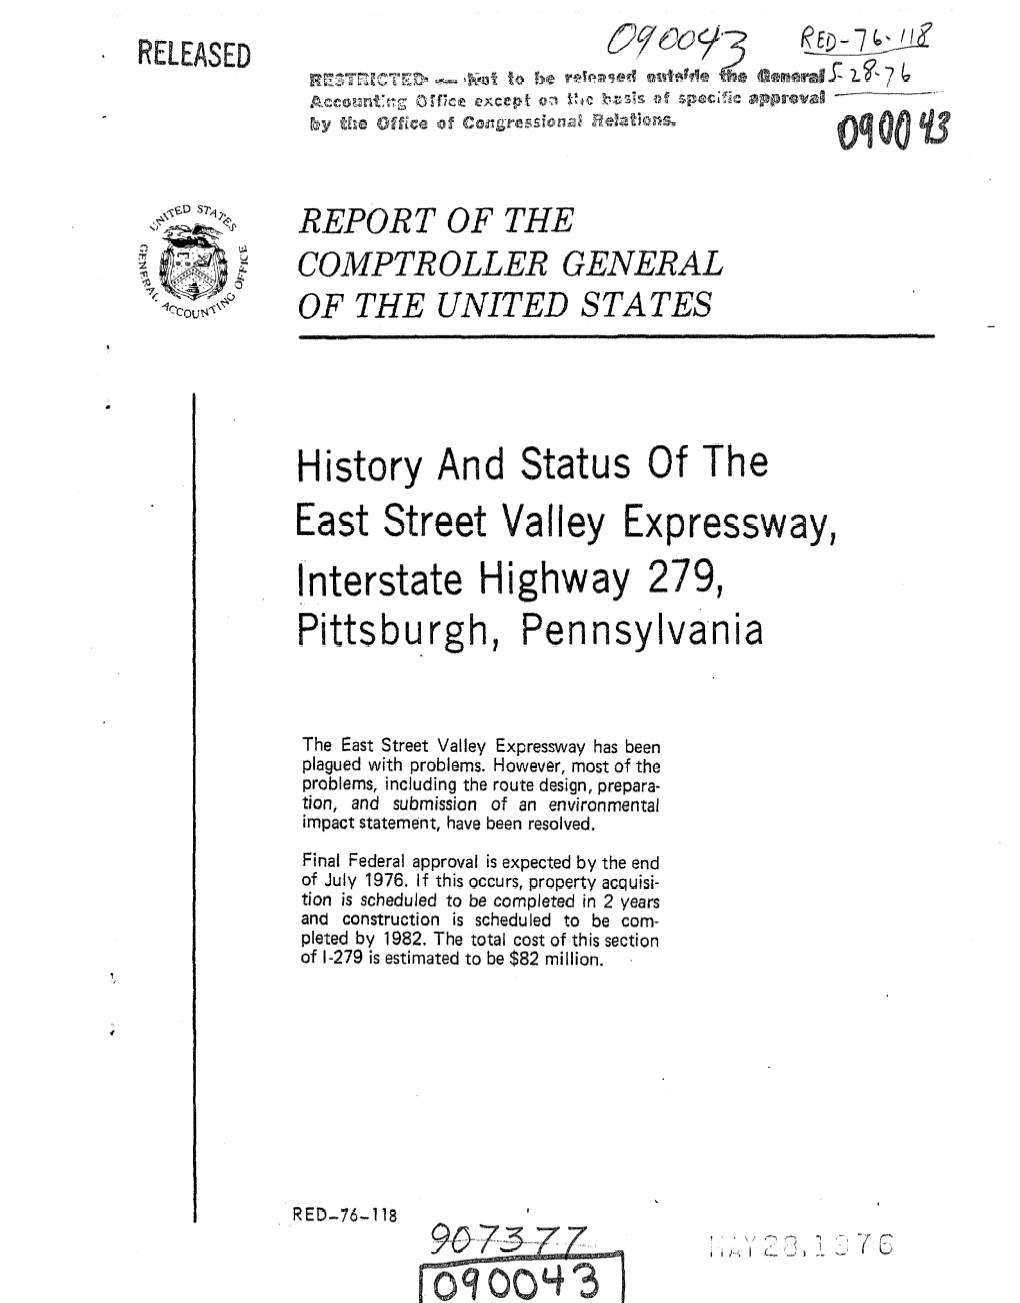 RED-76-118 History and Status of the East Street Valley Expressway